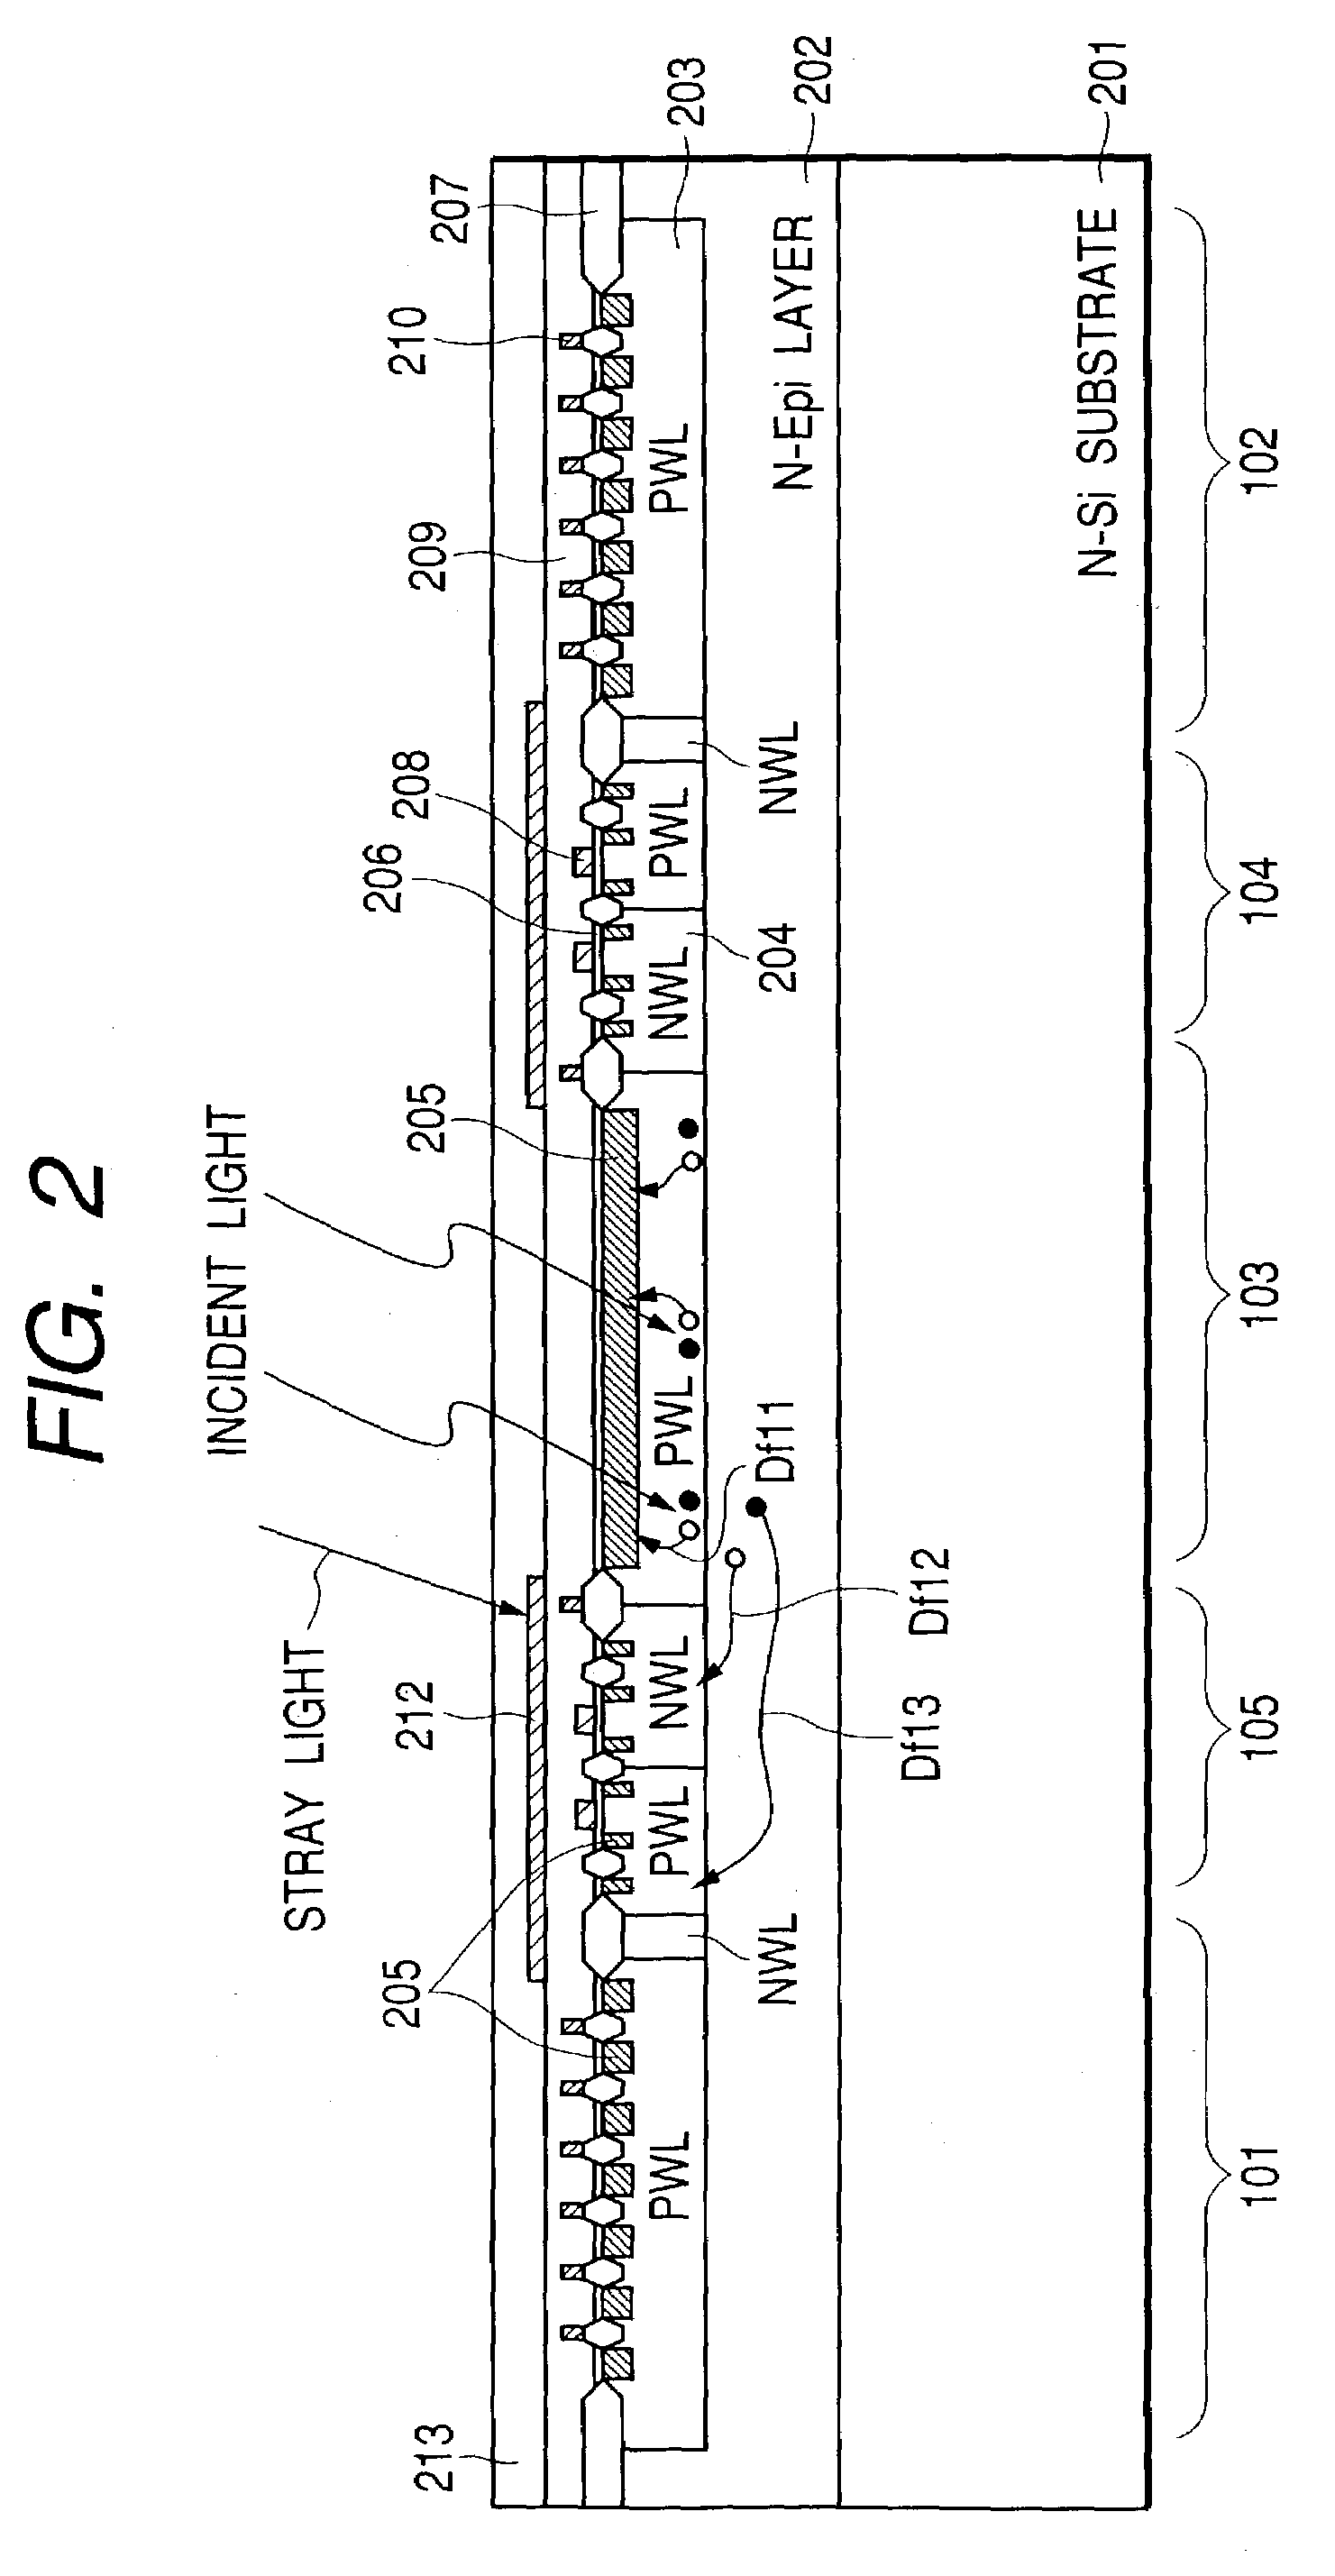 Solid state image pickup device